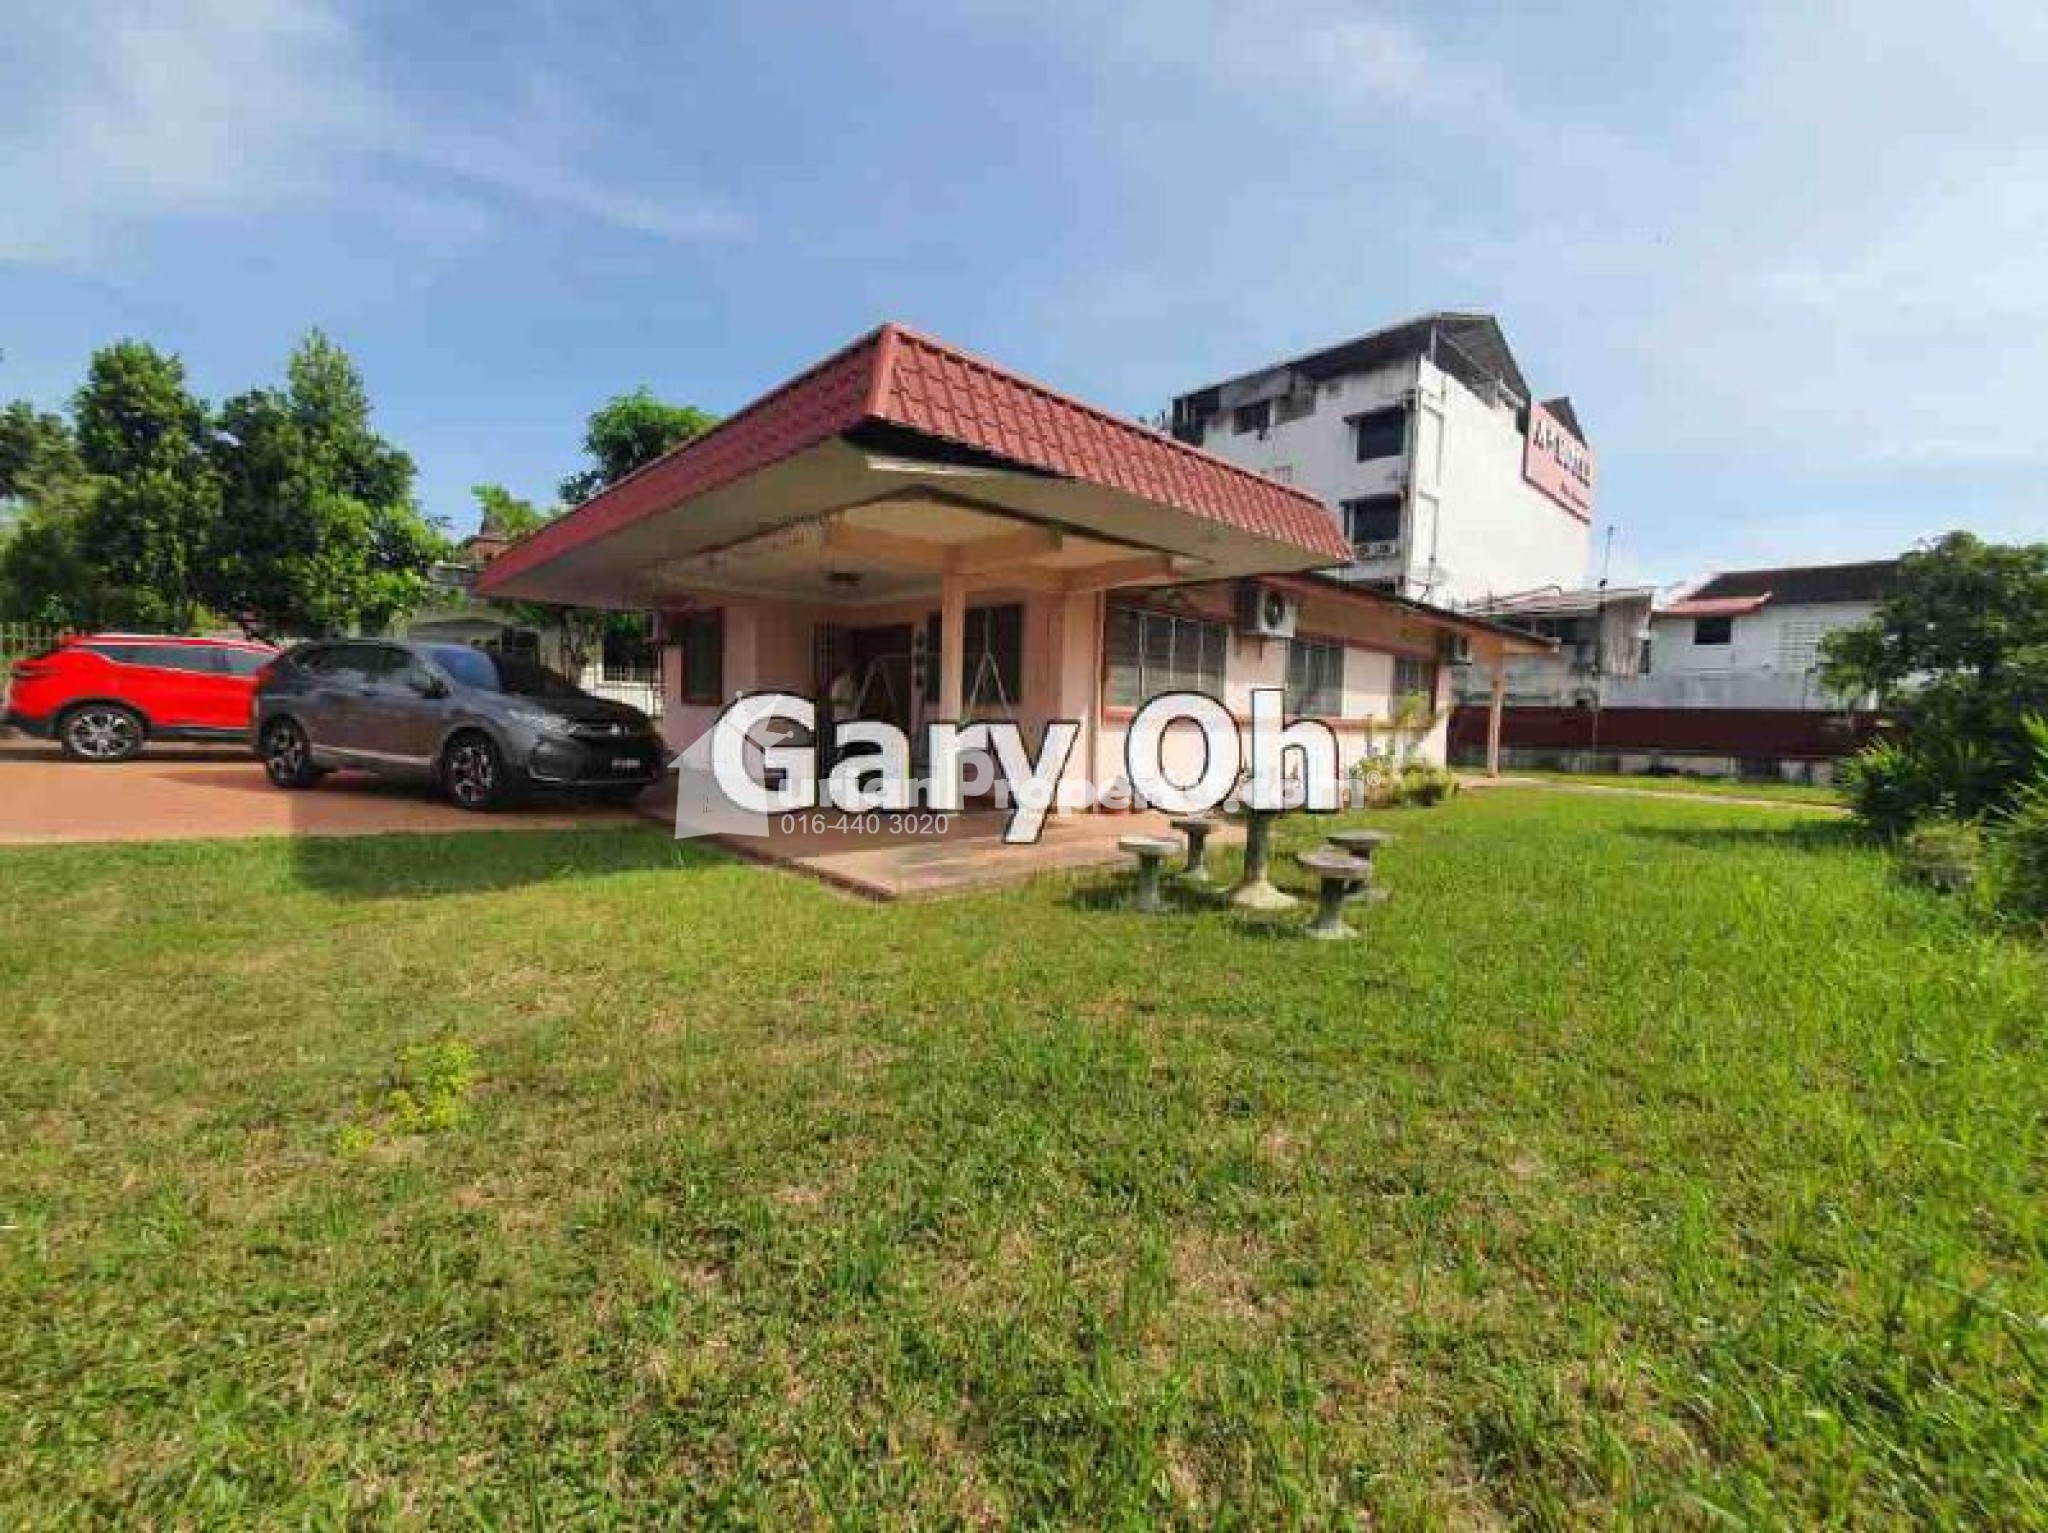 Bungalow House For Sale at Bukit Gelugor